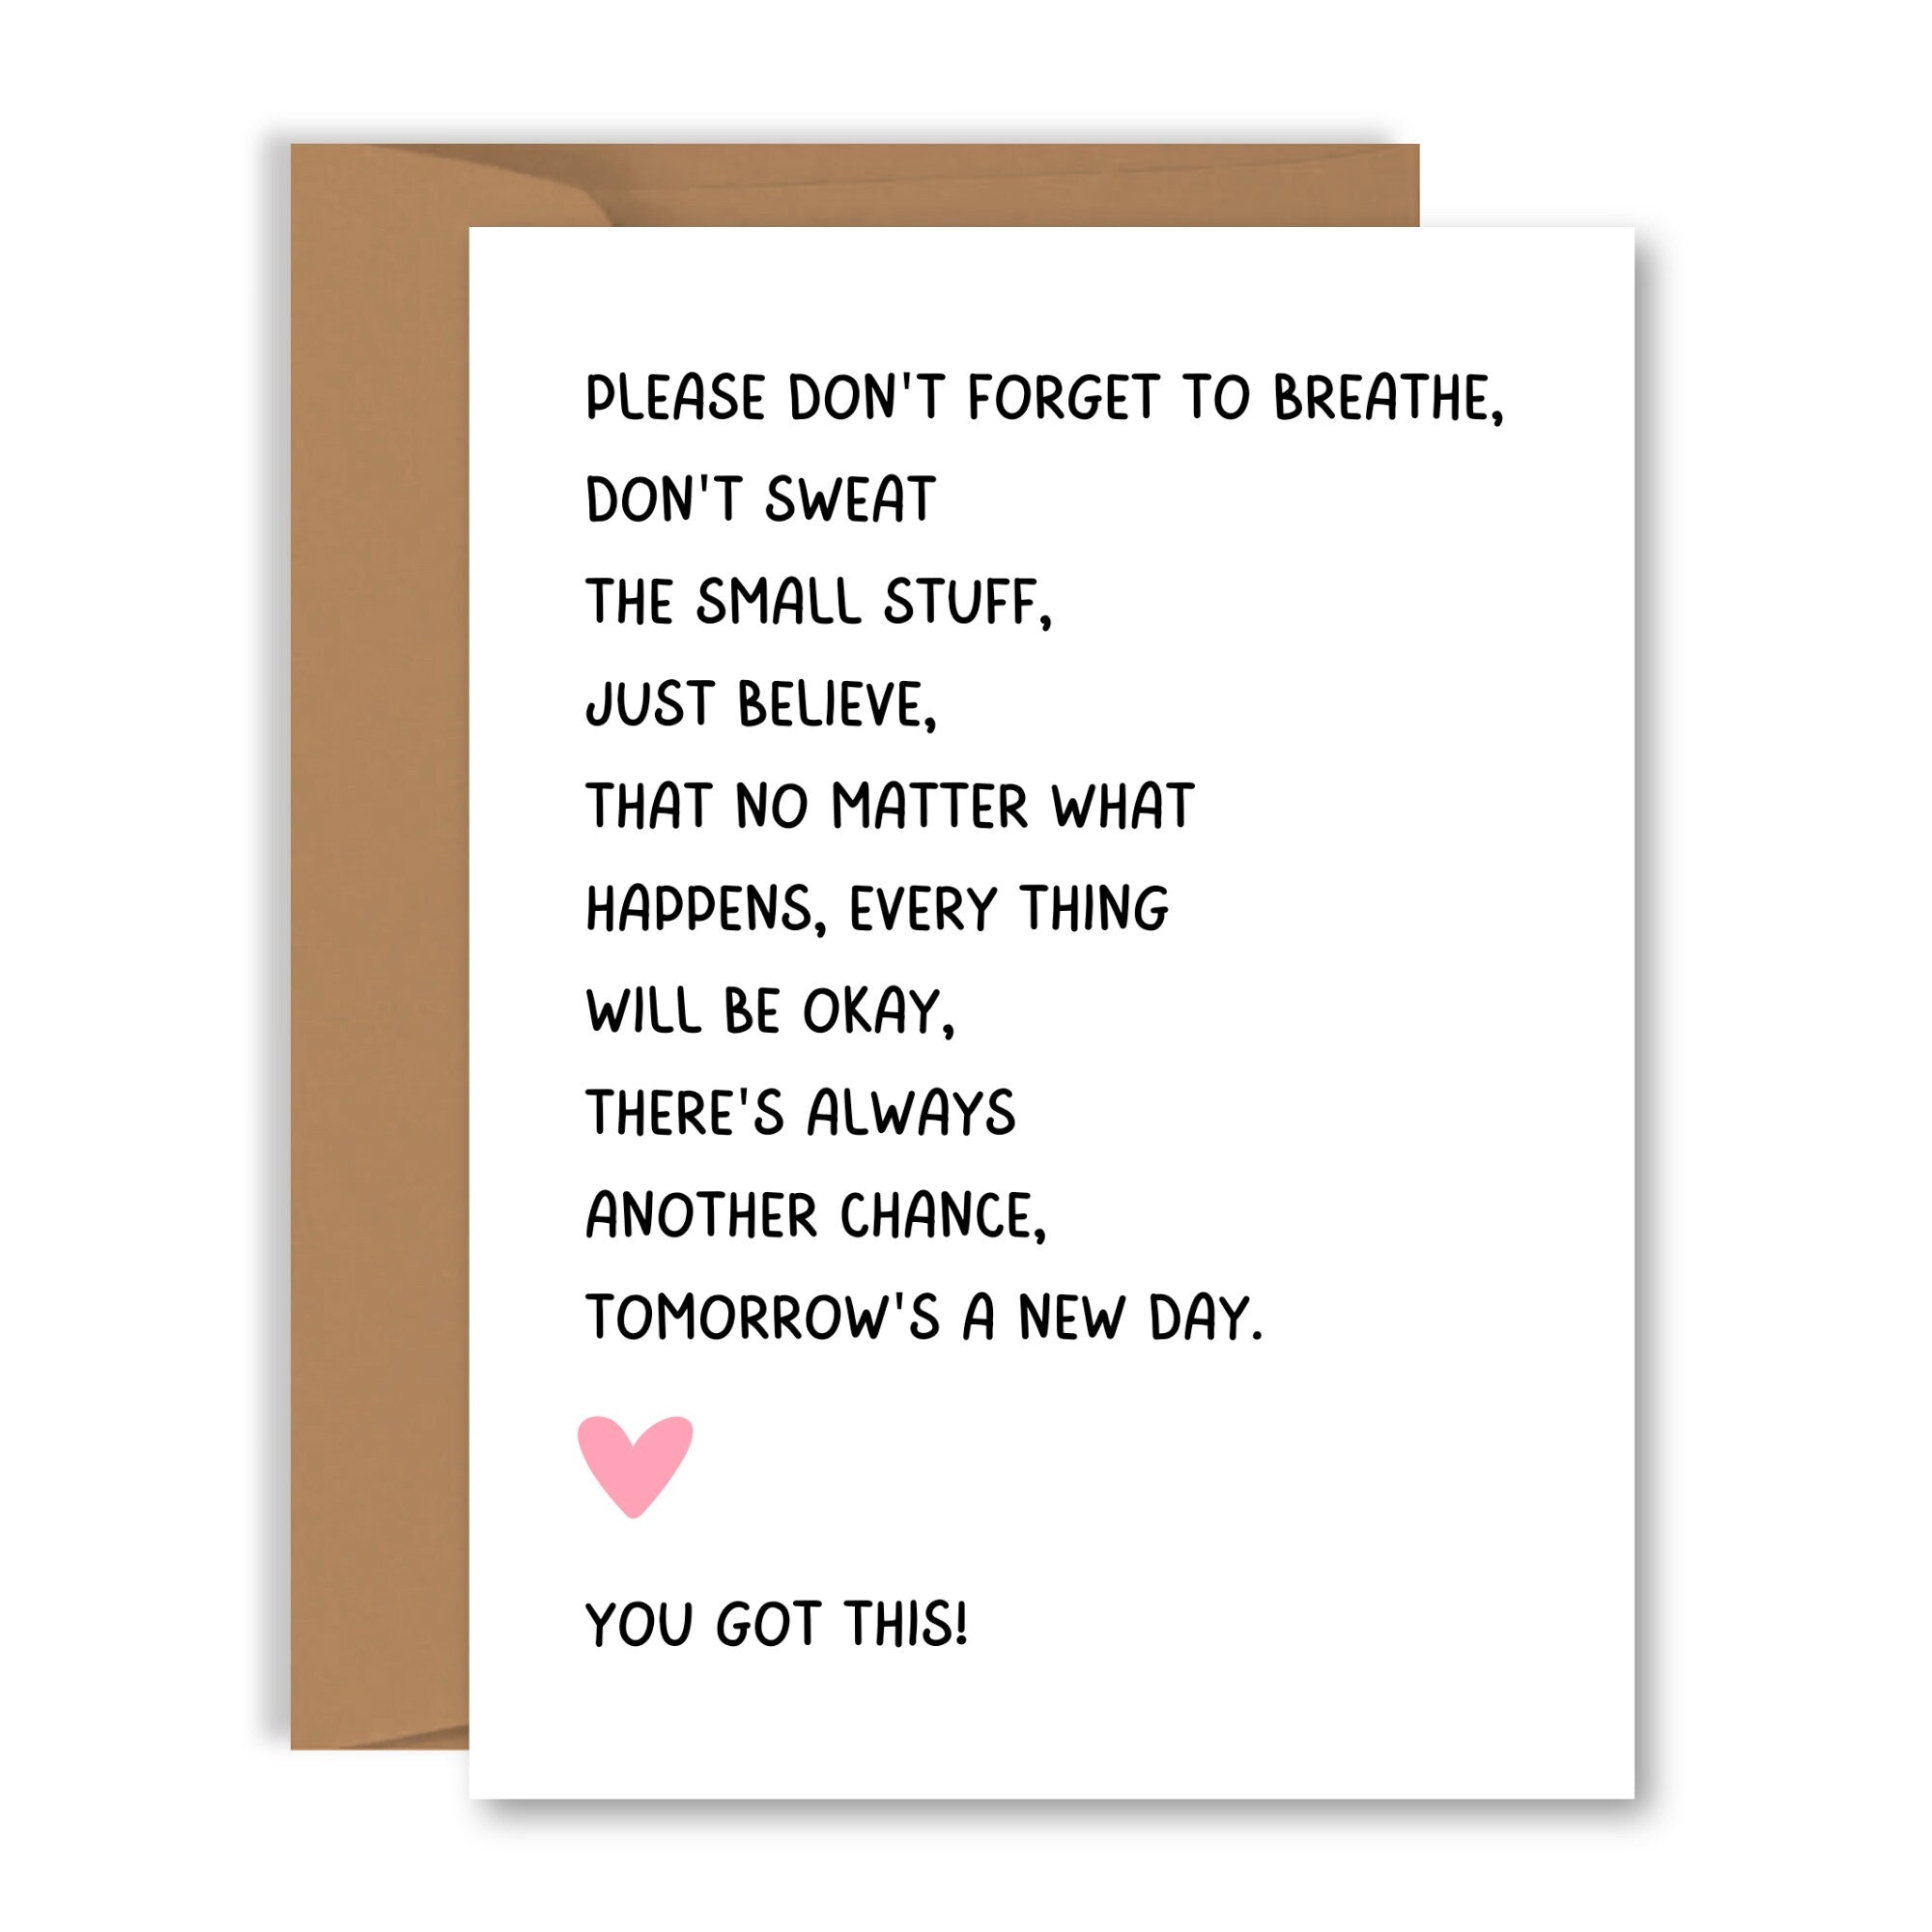 Good Luck Card, Congratulations Card, New Job, Leaving Work, Colleague Leaving Card, Sorry Your Leaving Card, you got this